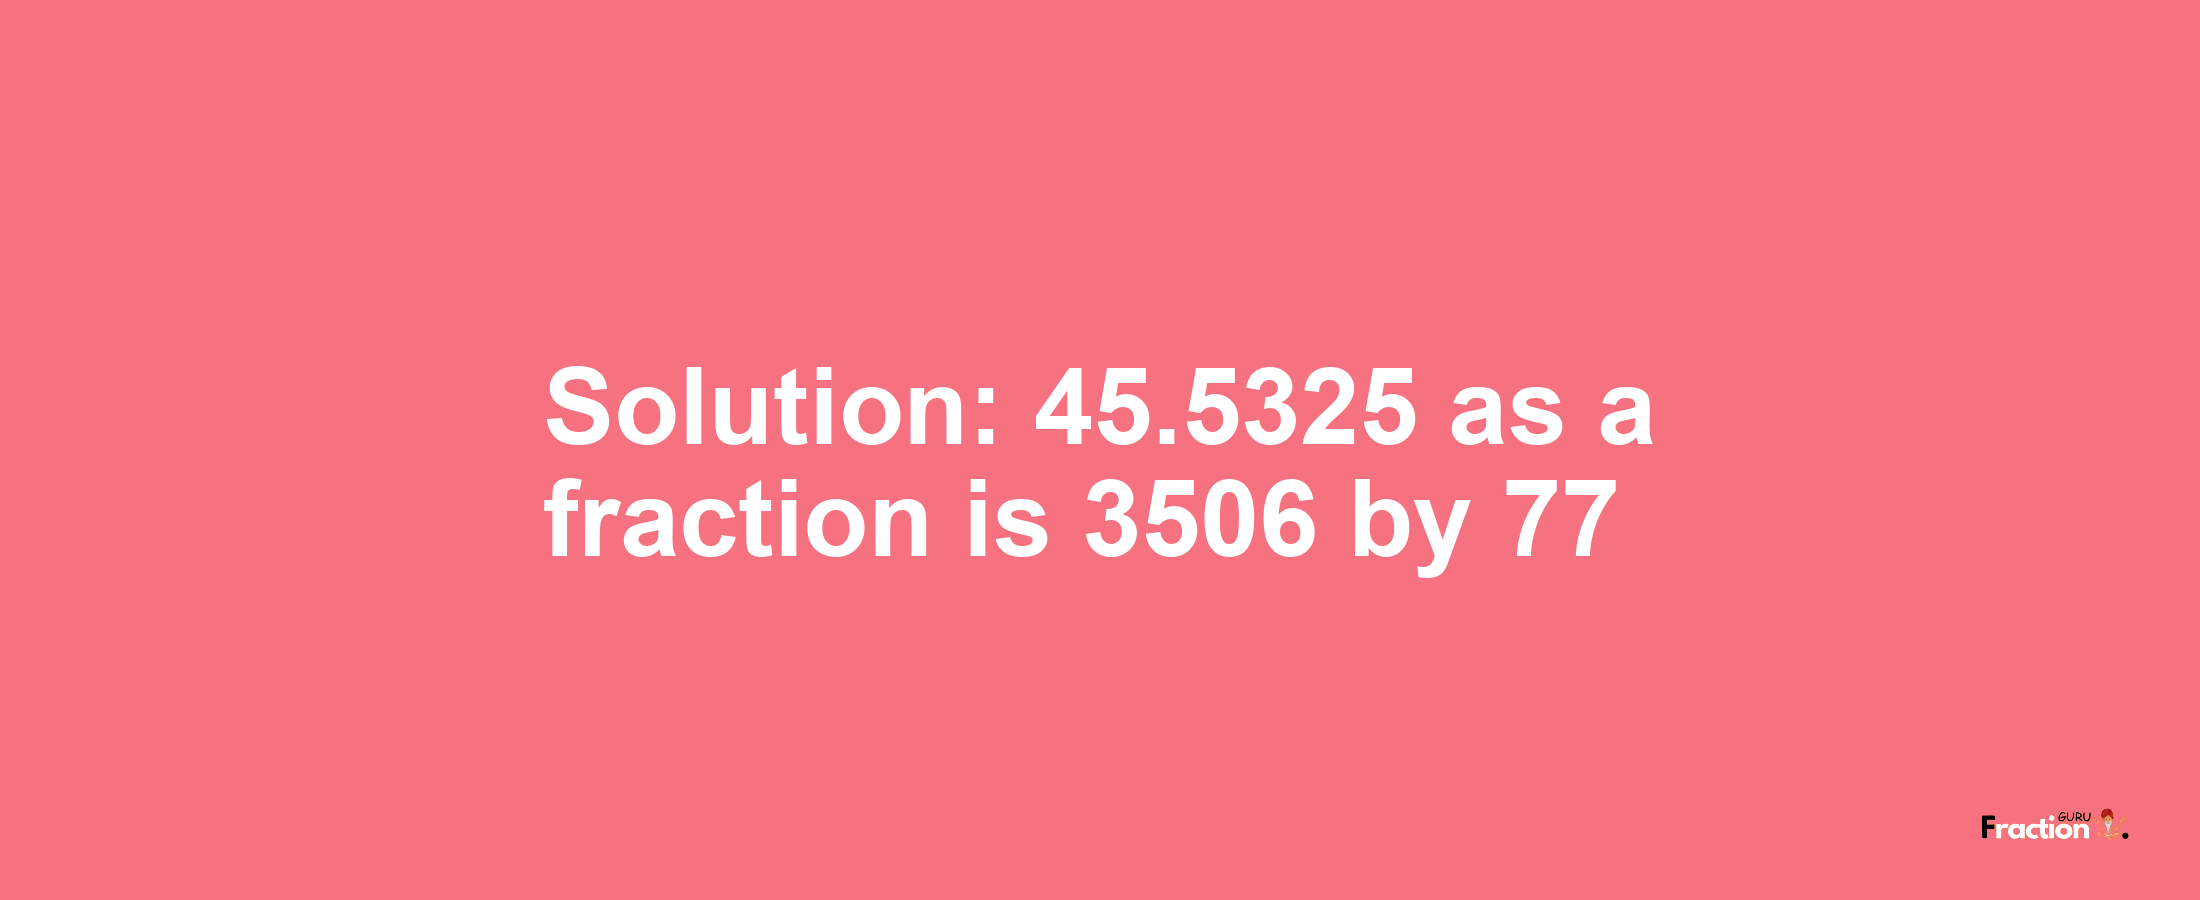 Solution:45.5325 as a fraction is 3506/77